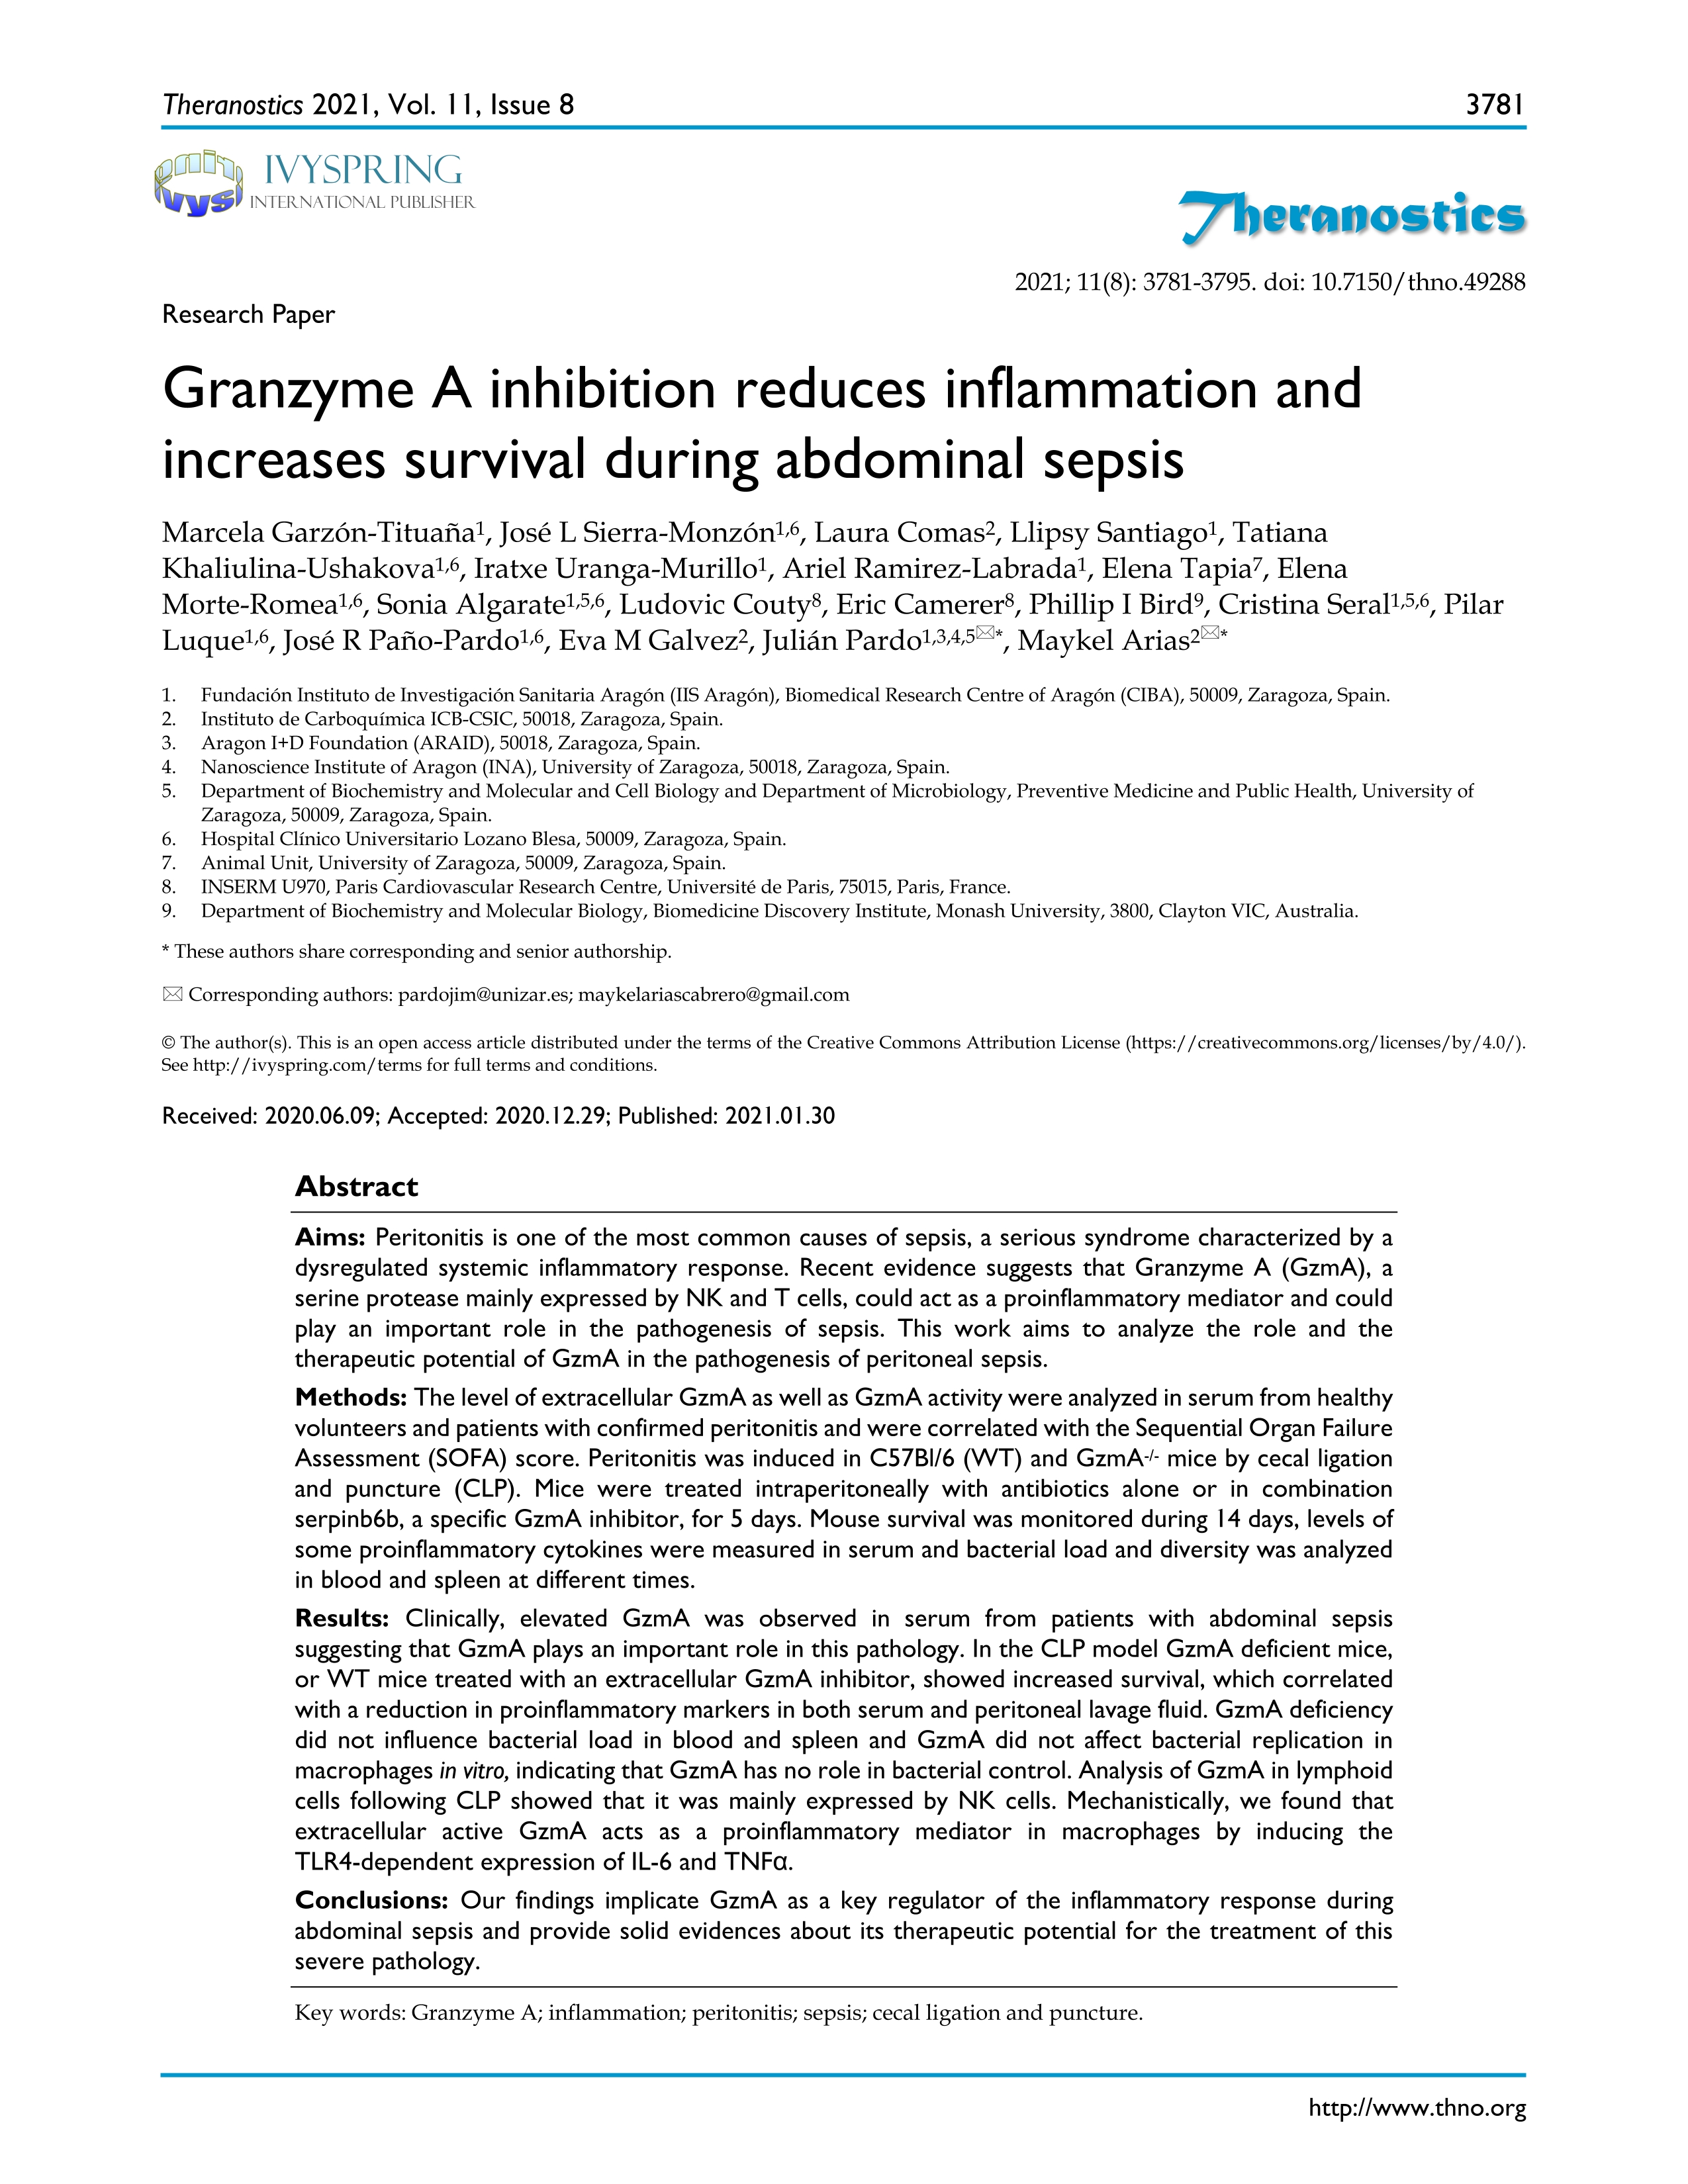 Granzyme A inhibition reduces inflammation and increases survival during abdominal sepsis